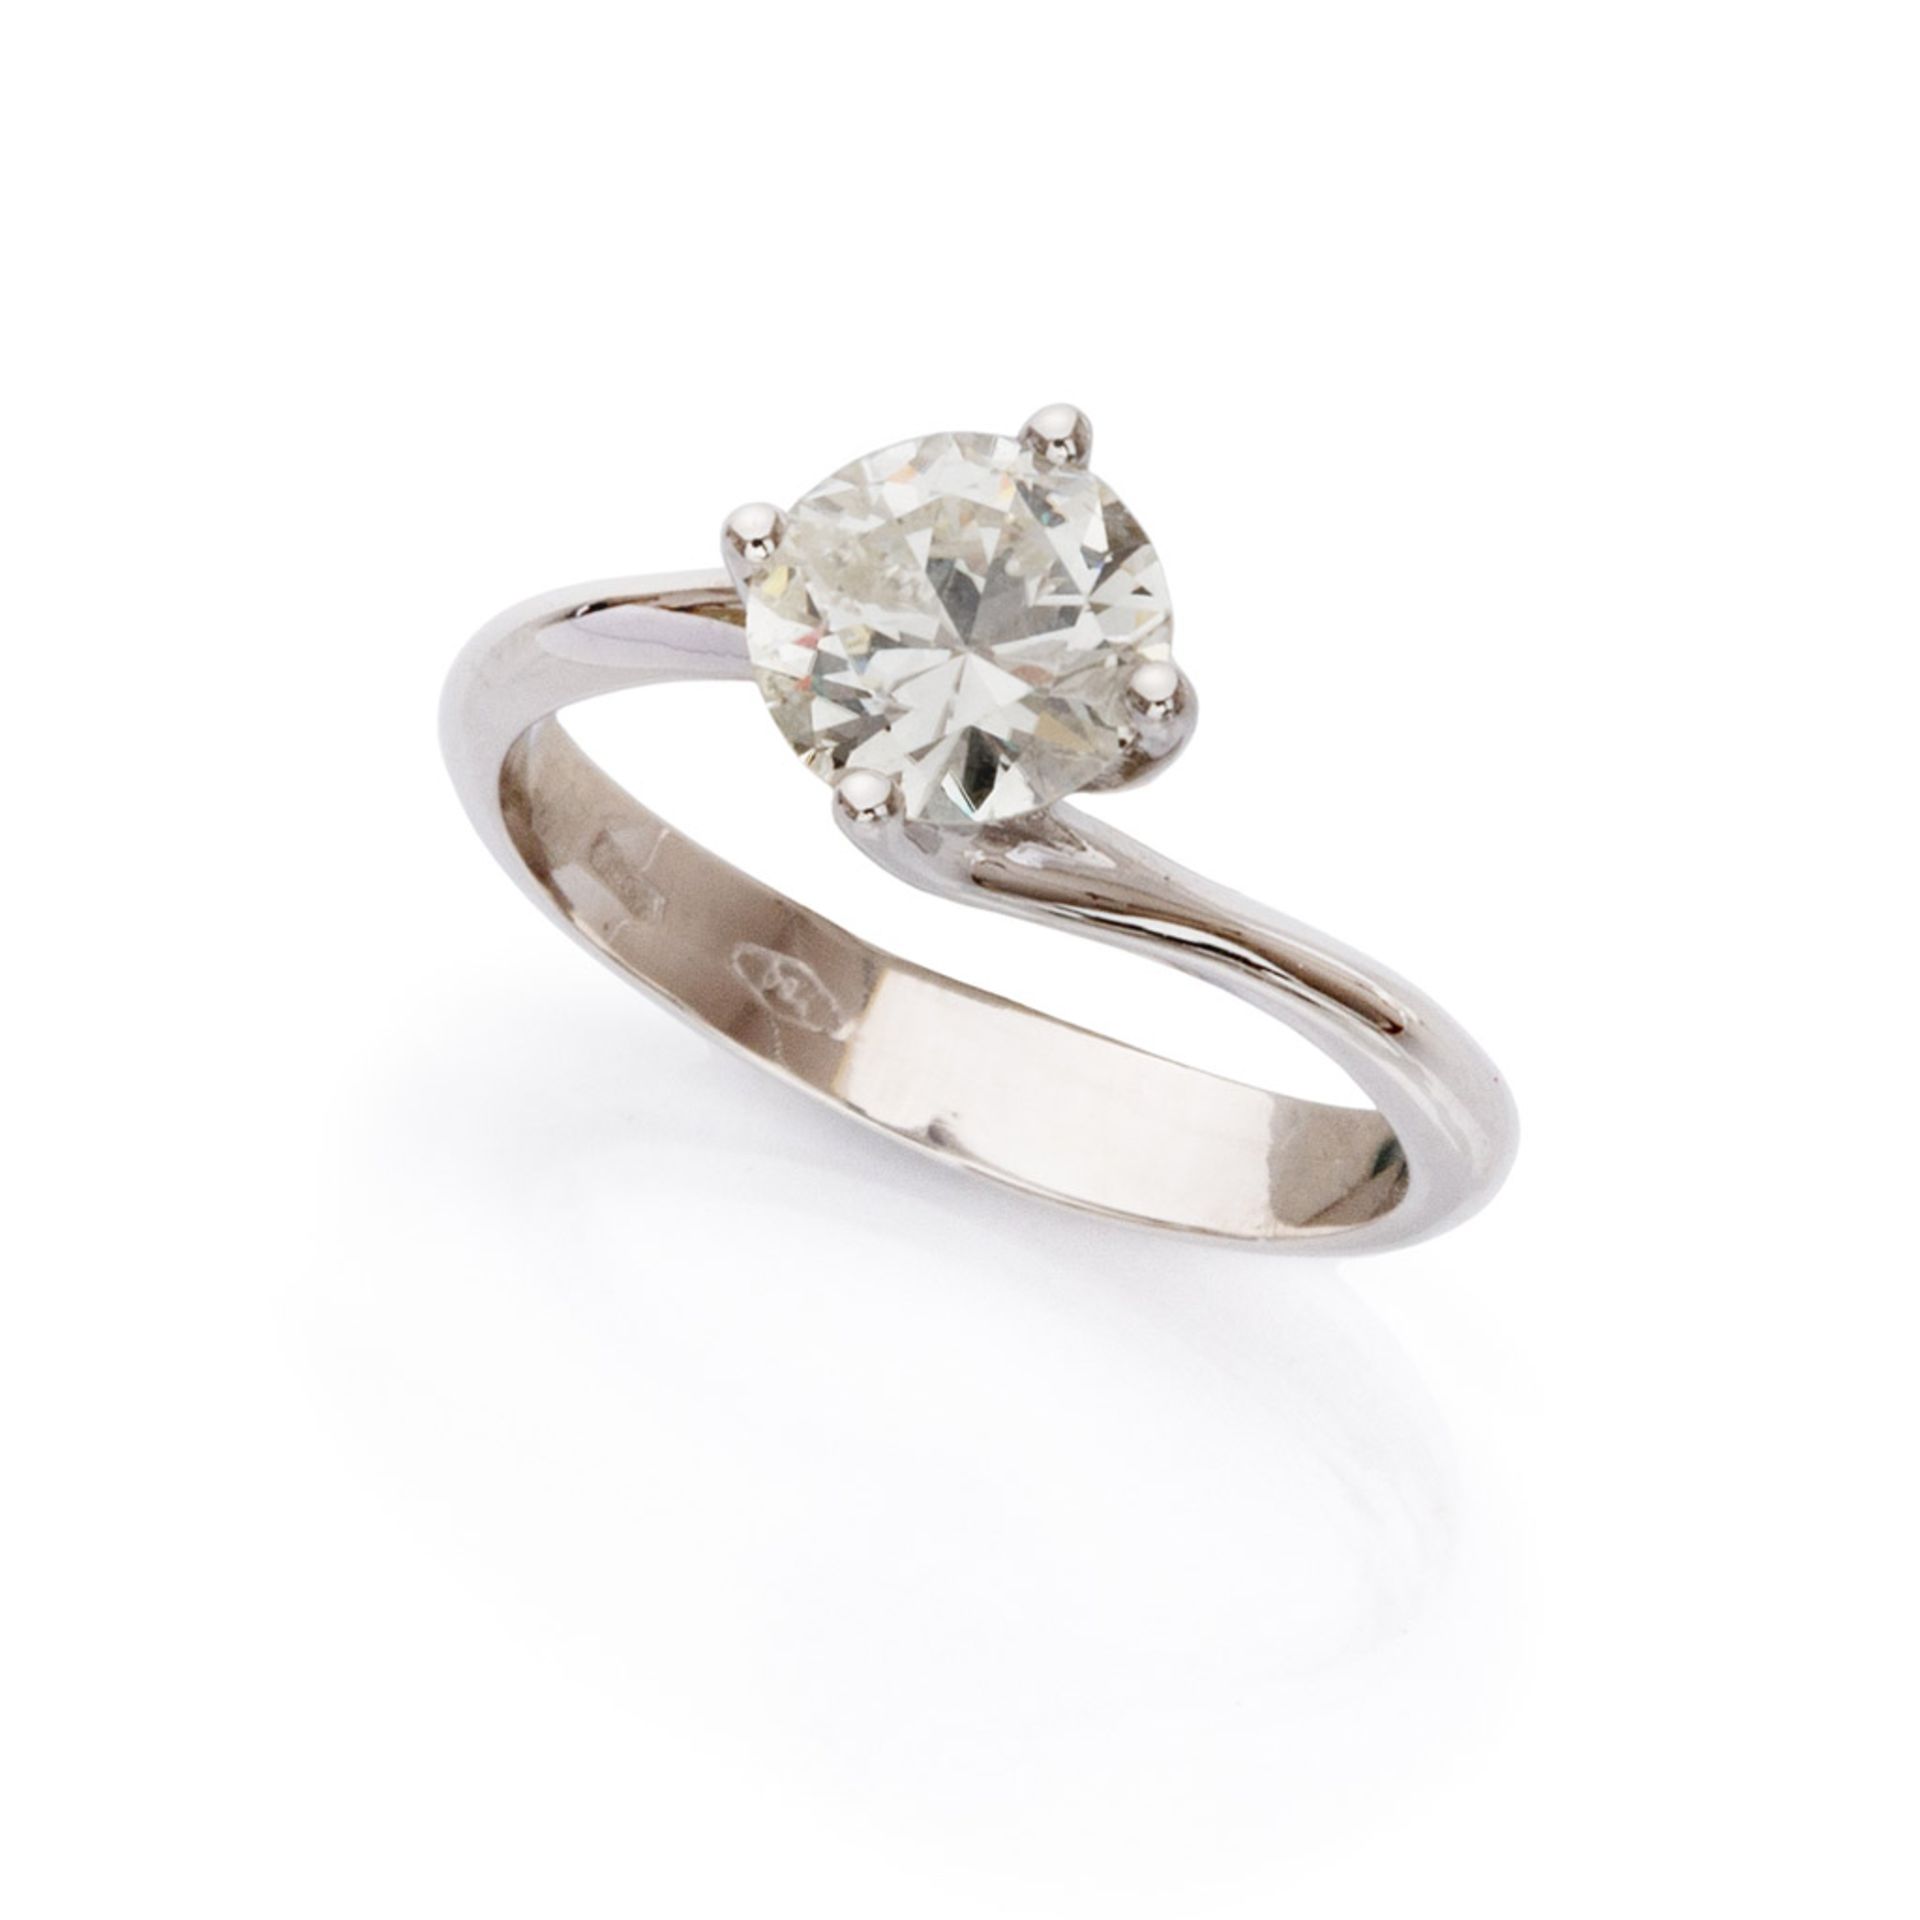 SOLITAIRE RING in white gold 18 kts., with central diamond. Diamond ct. 1.10 ca., color HI,